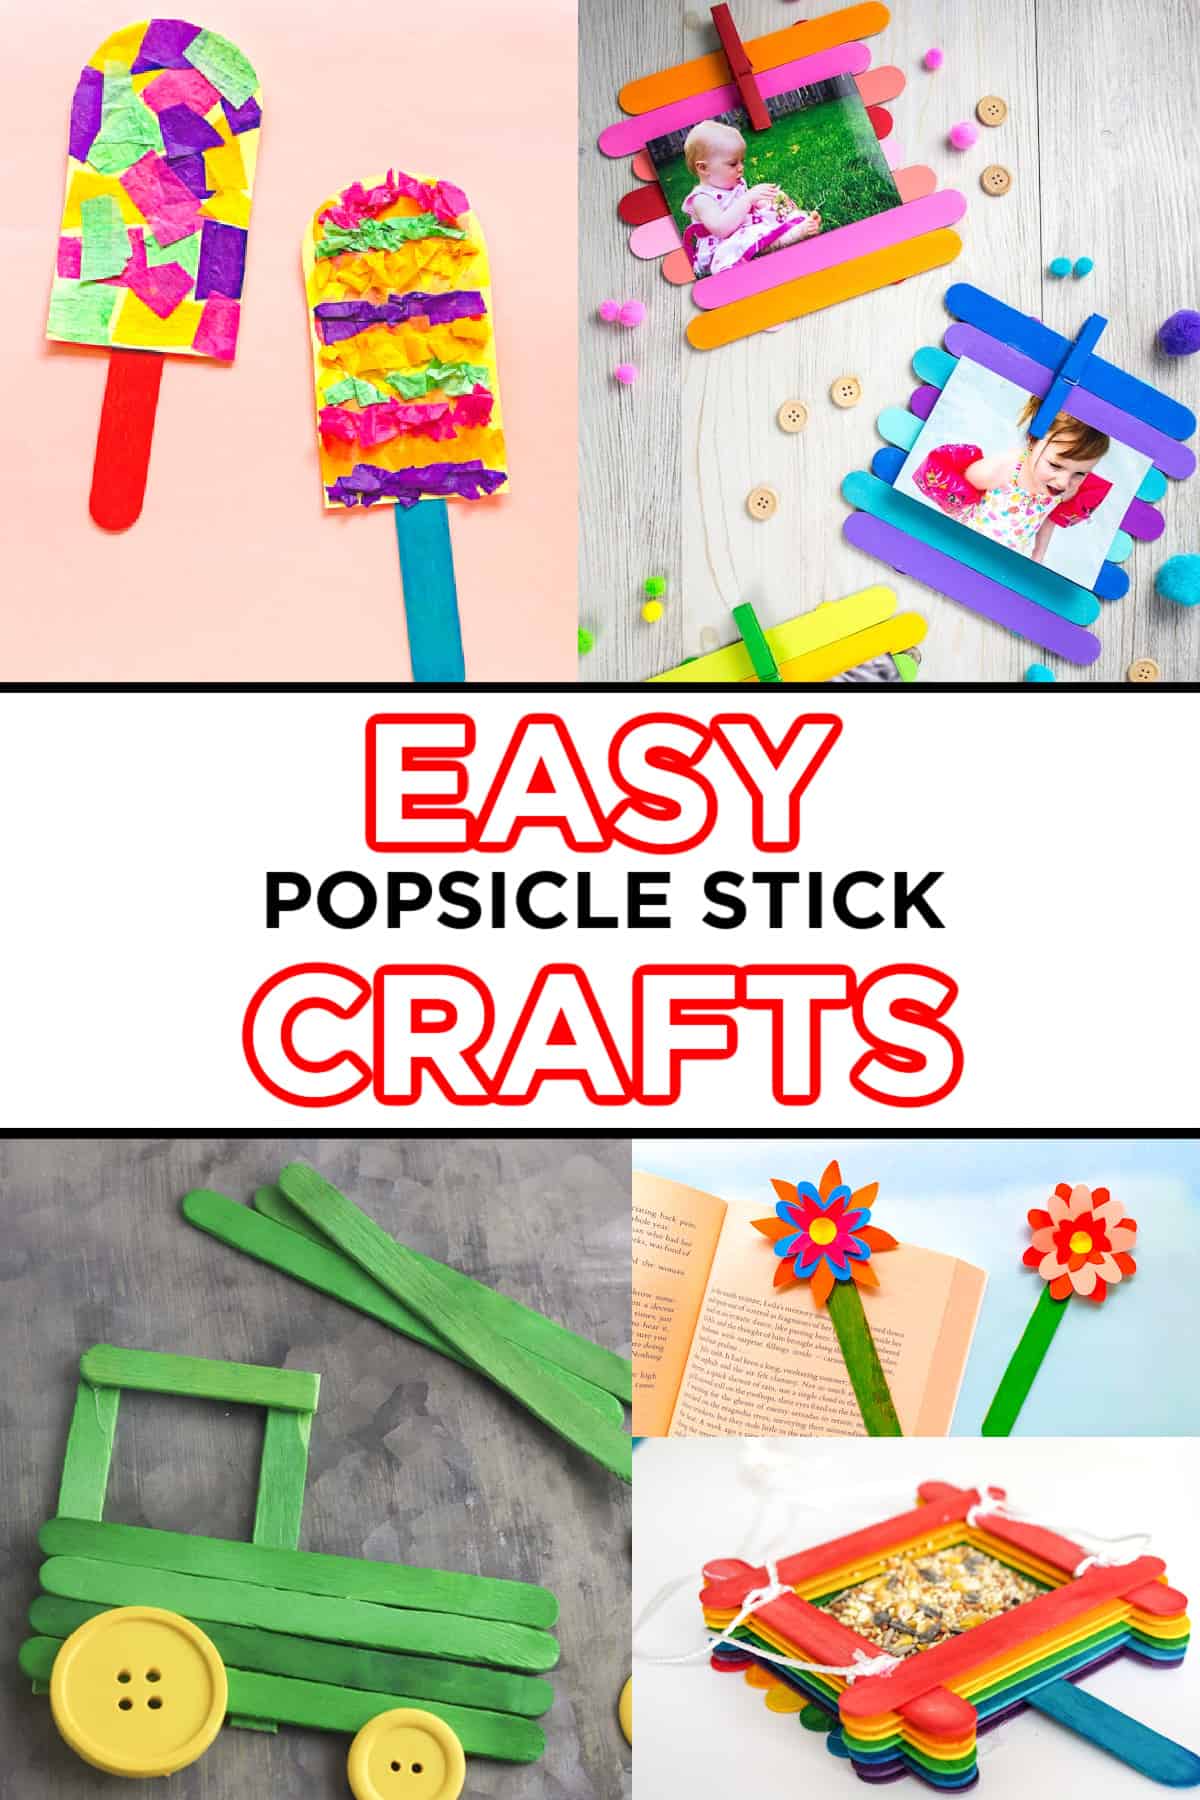 The Best Popsicle Stick Crafts